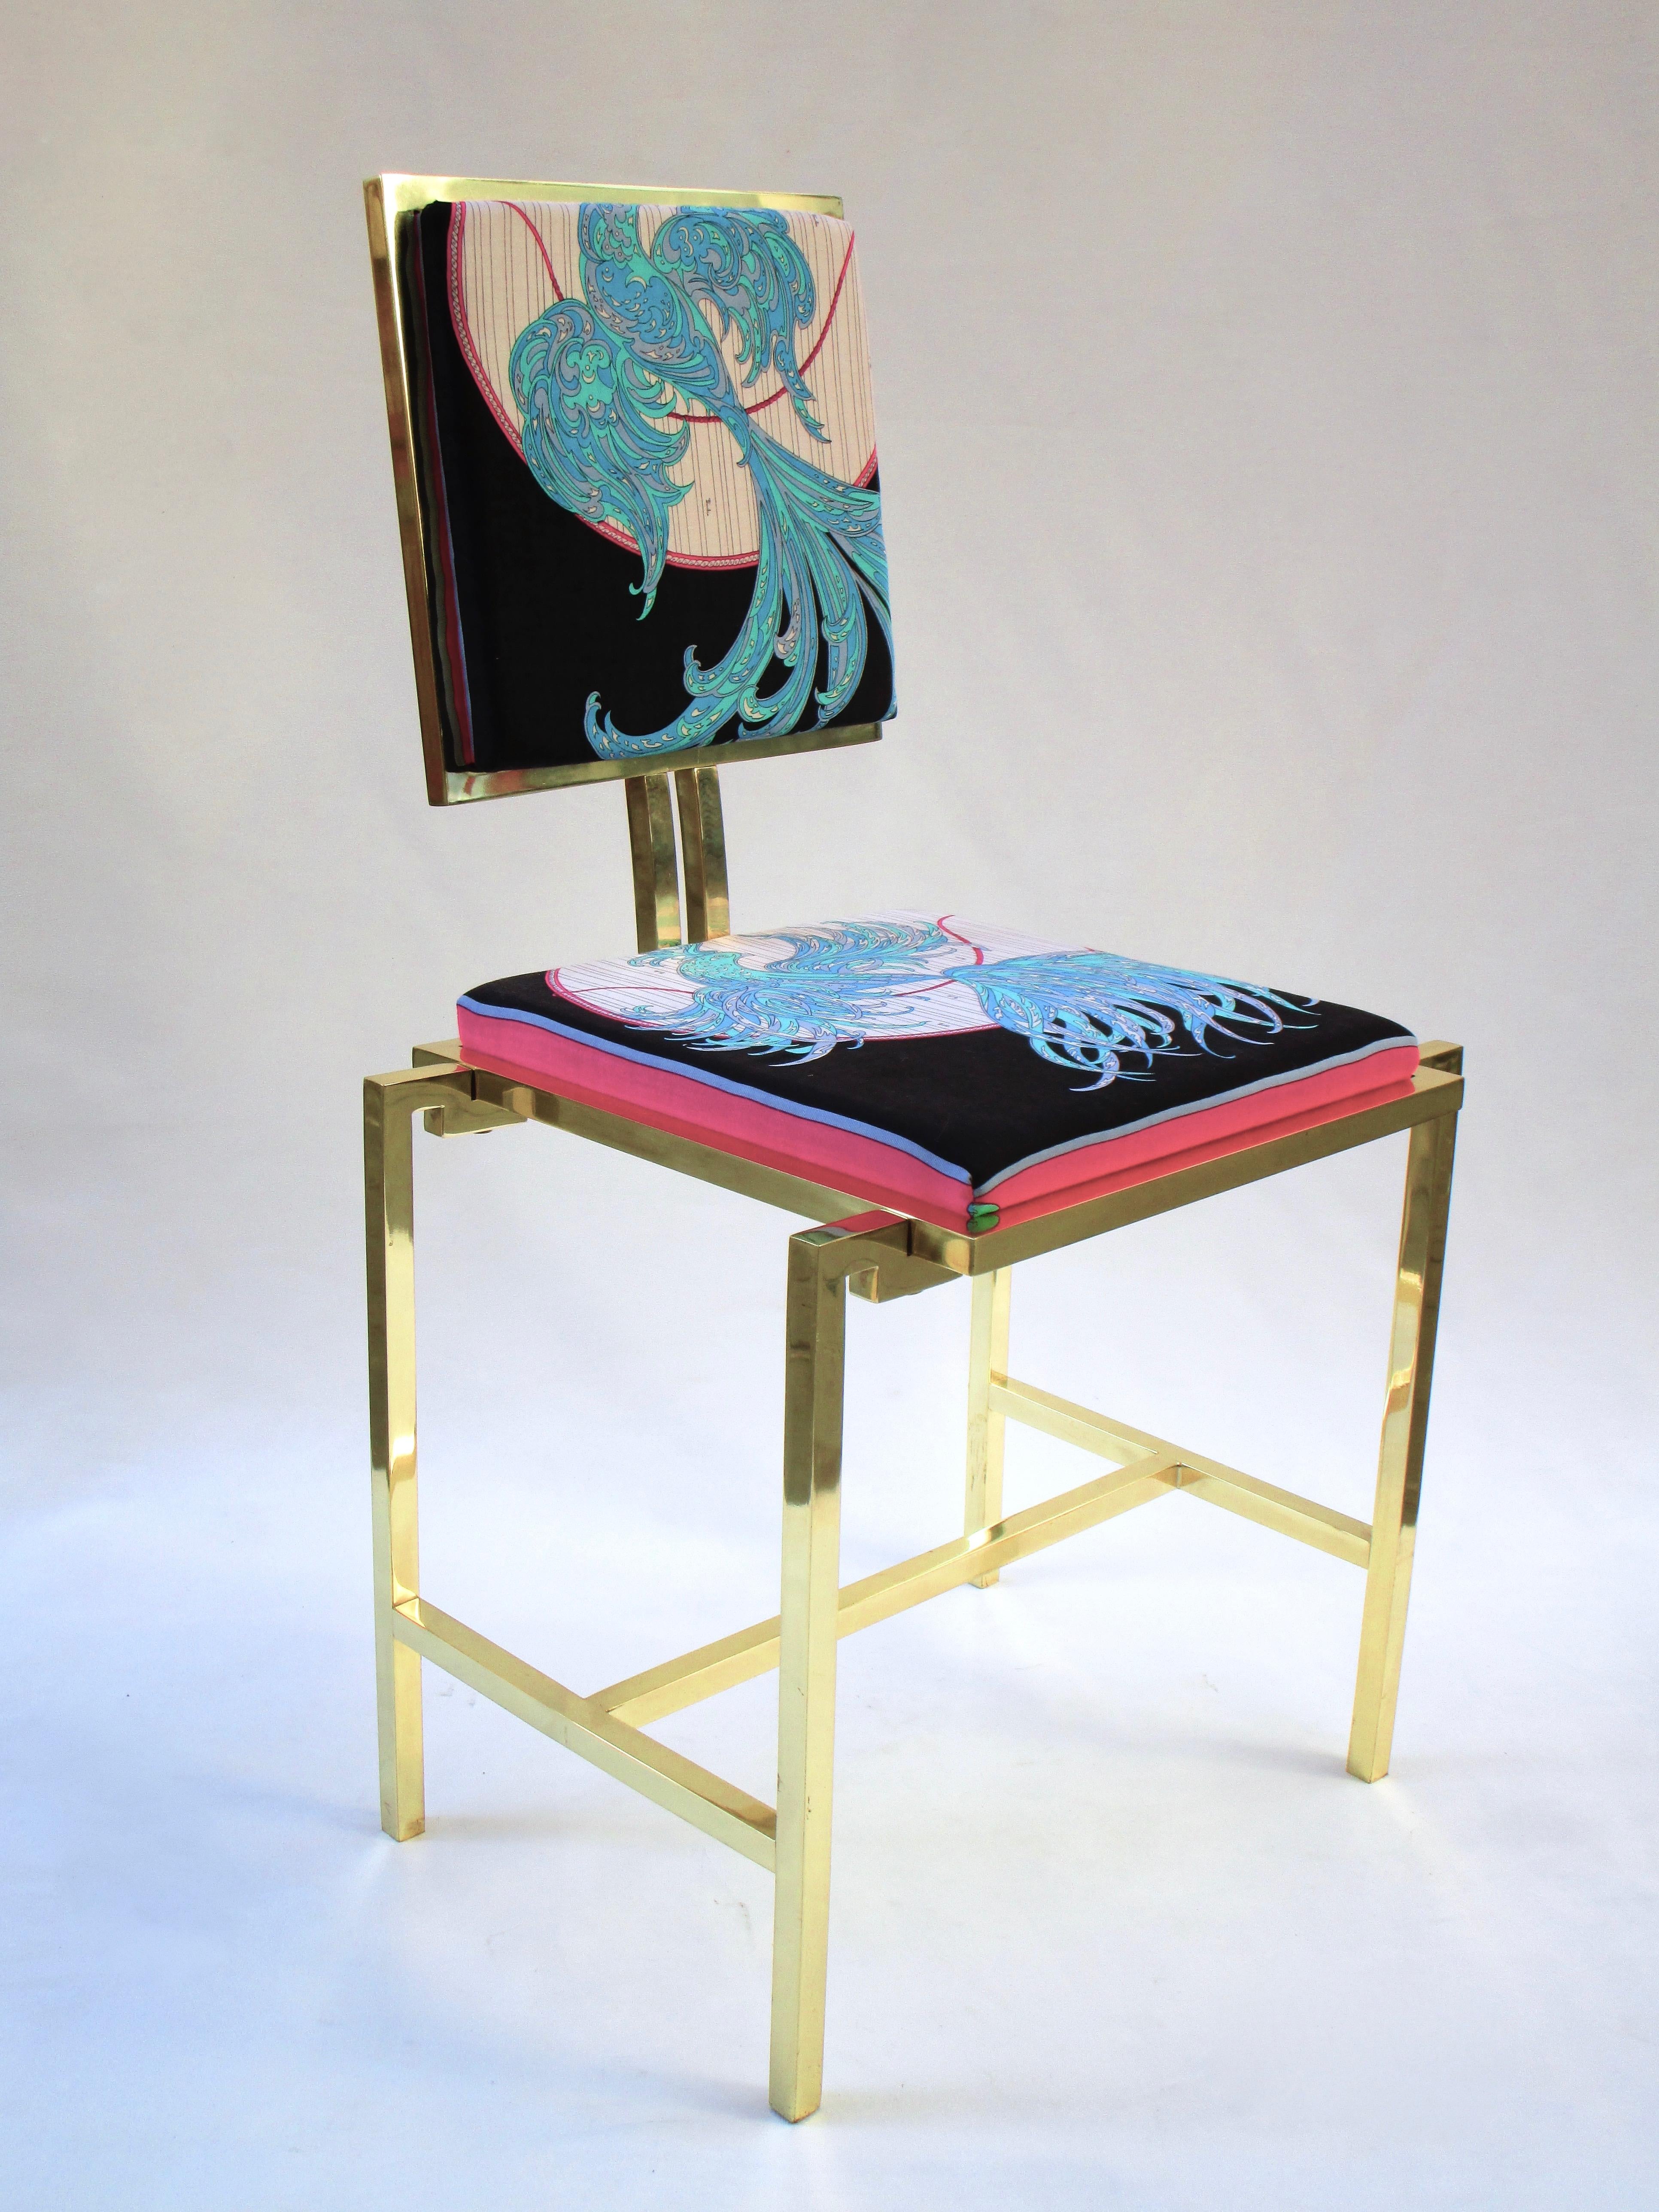 Simple chair by Nicola Falcone.

Limited Edition with Emilio Pucci Fabric from the Archive, 1969.

A simple yet elegant chair with solid lines framed with gold painted brass. For sophisticated or simple contemporary setting. 

Measures: 45 cm